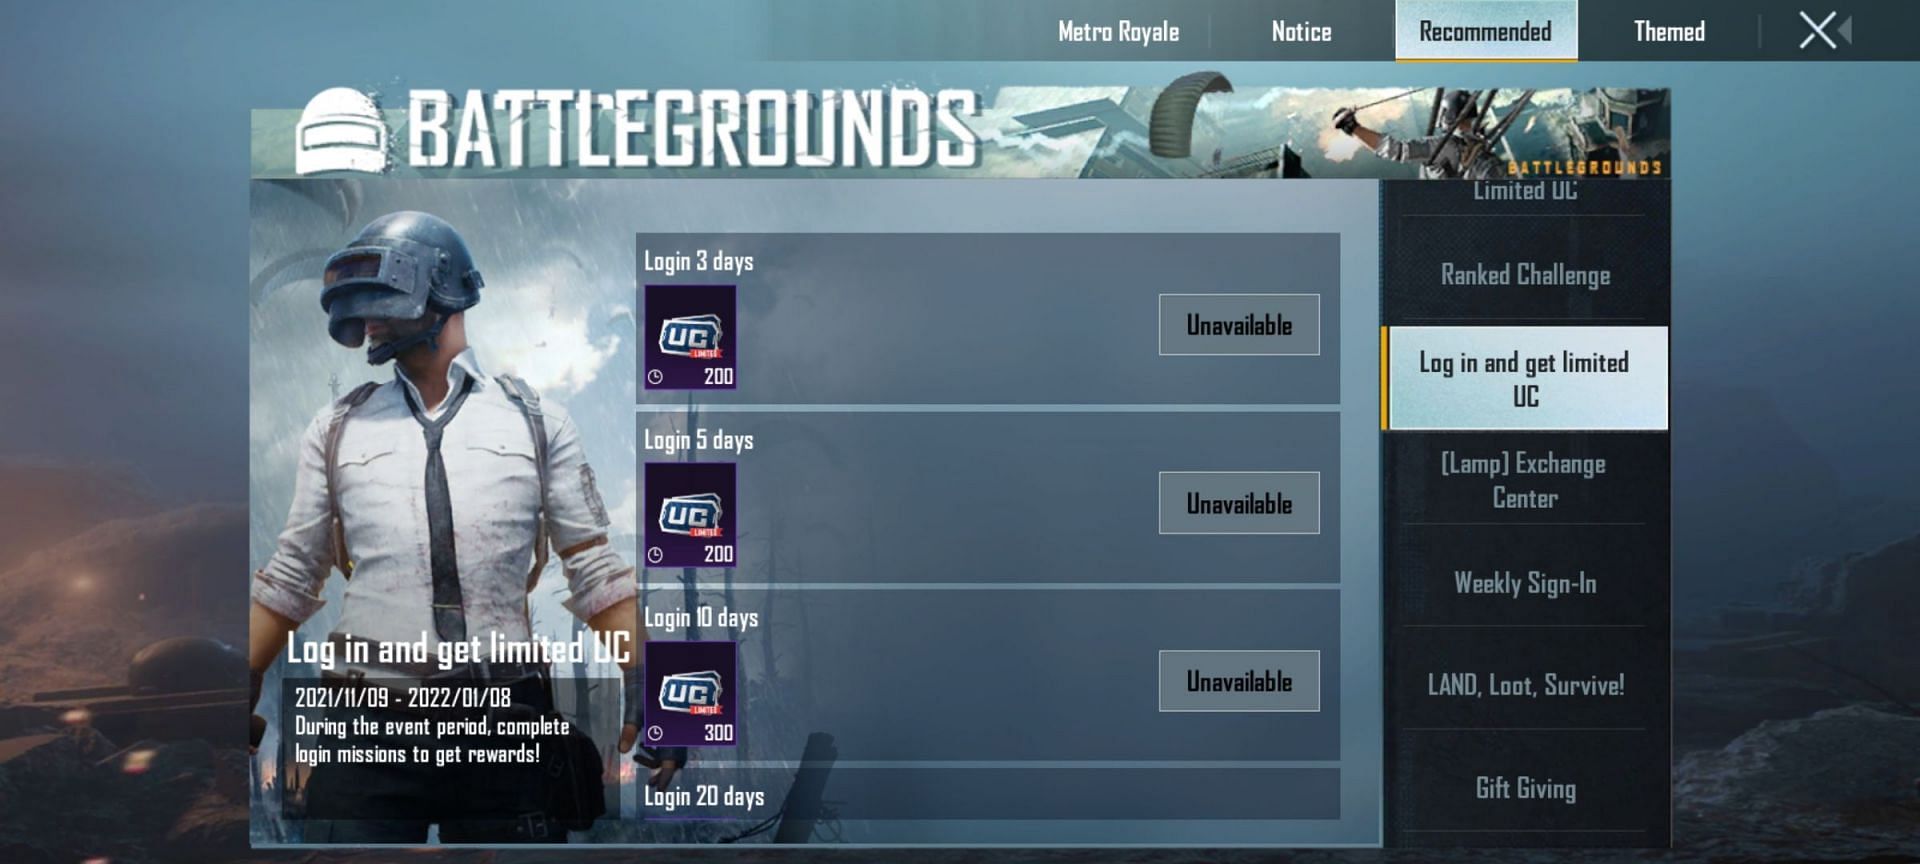 BGMI and PUBG Mobile Program to Receive Limited UC (Image via Crafton)